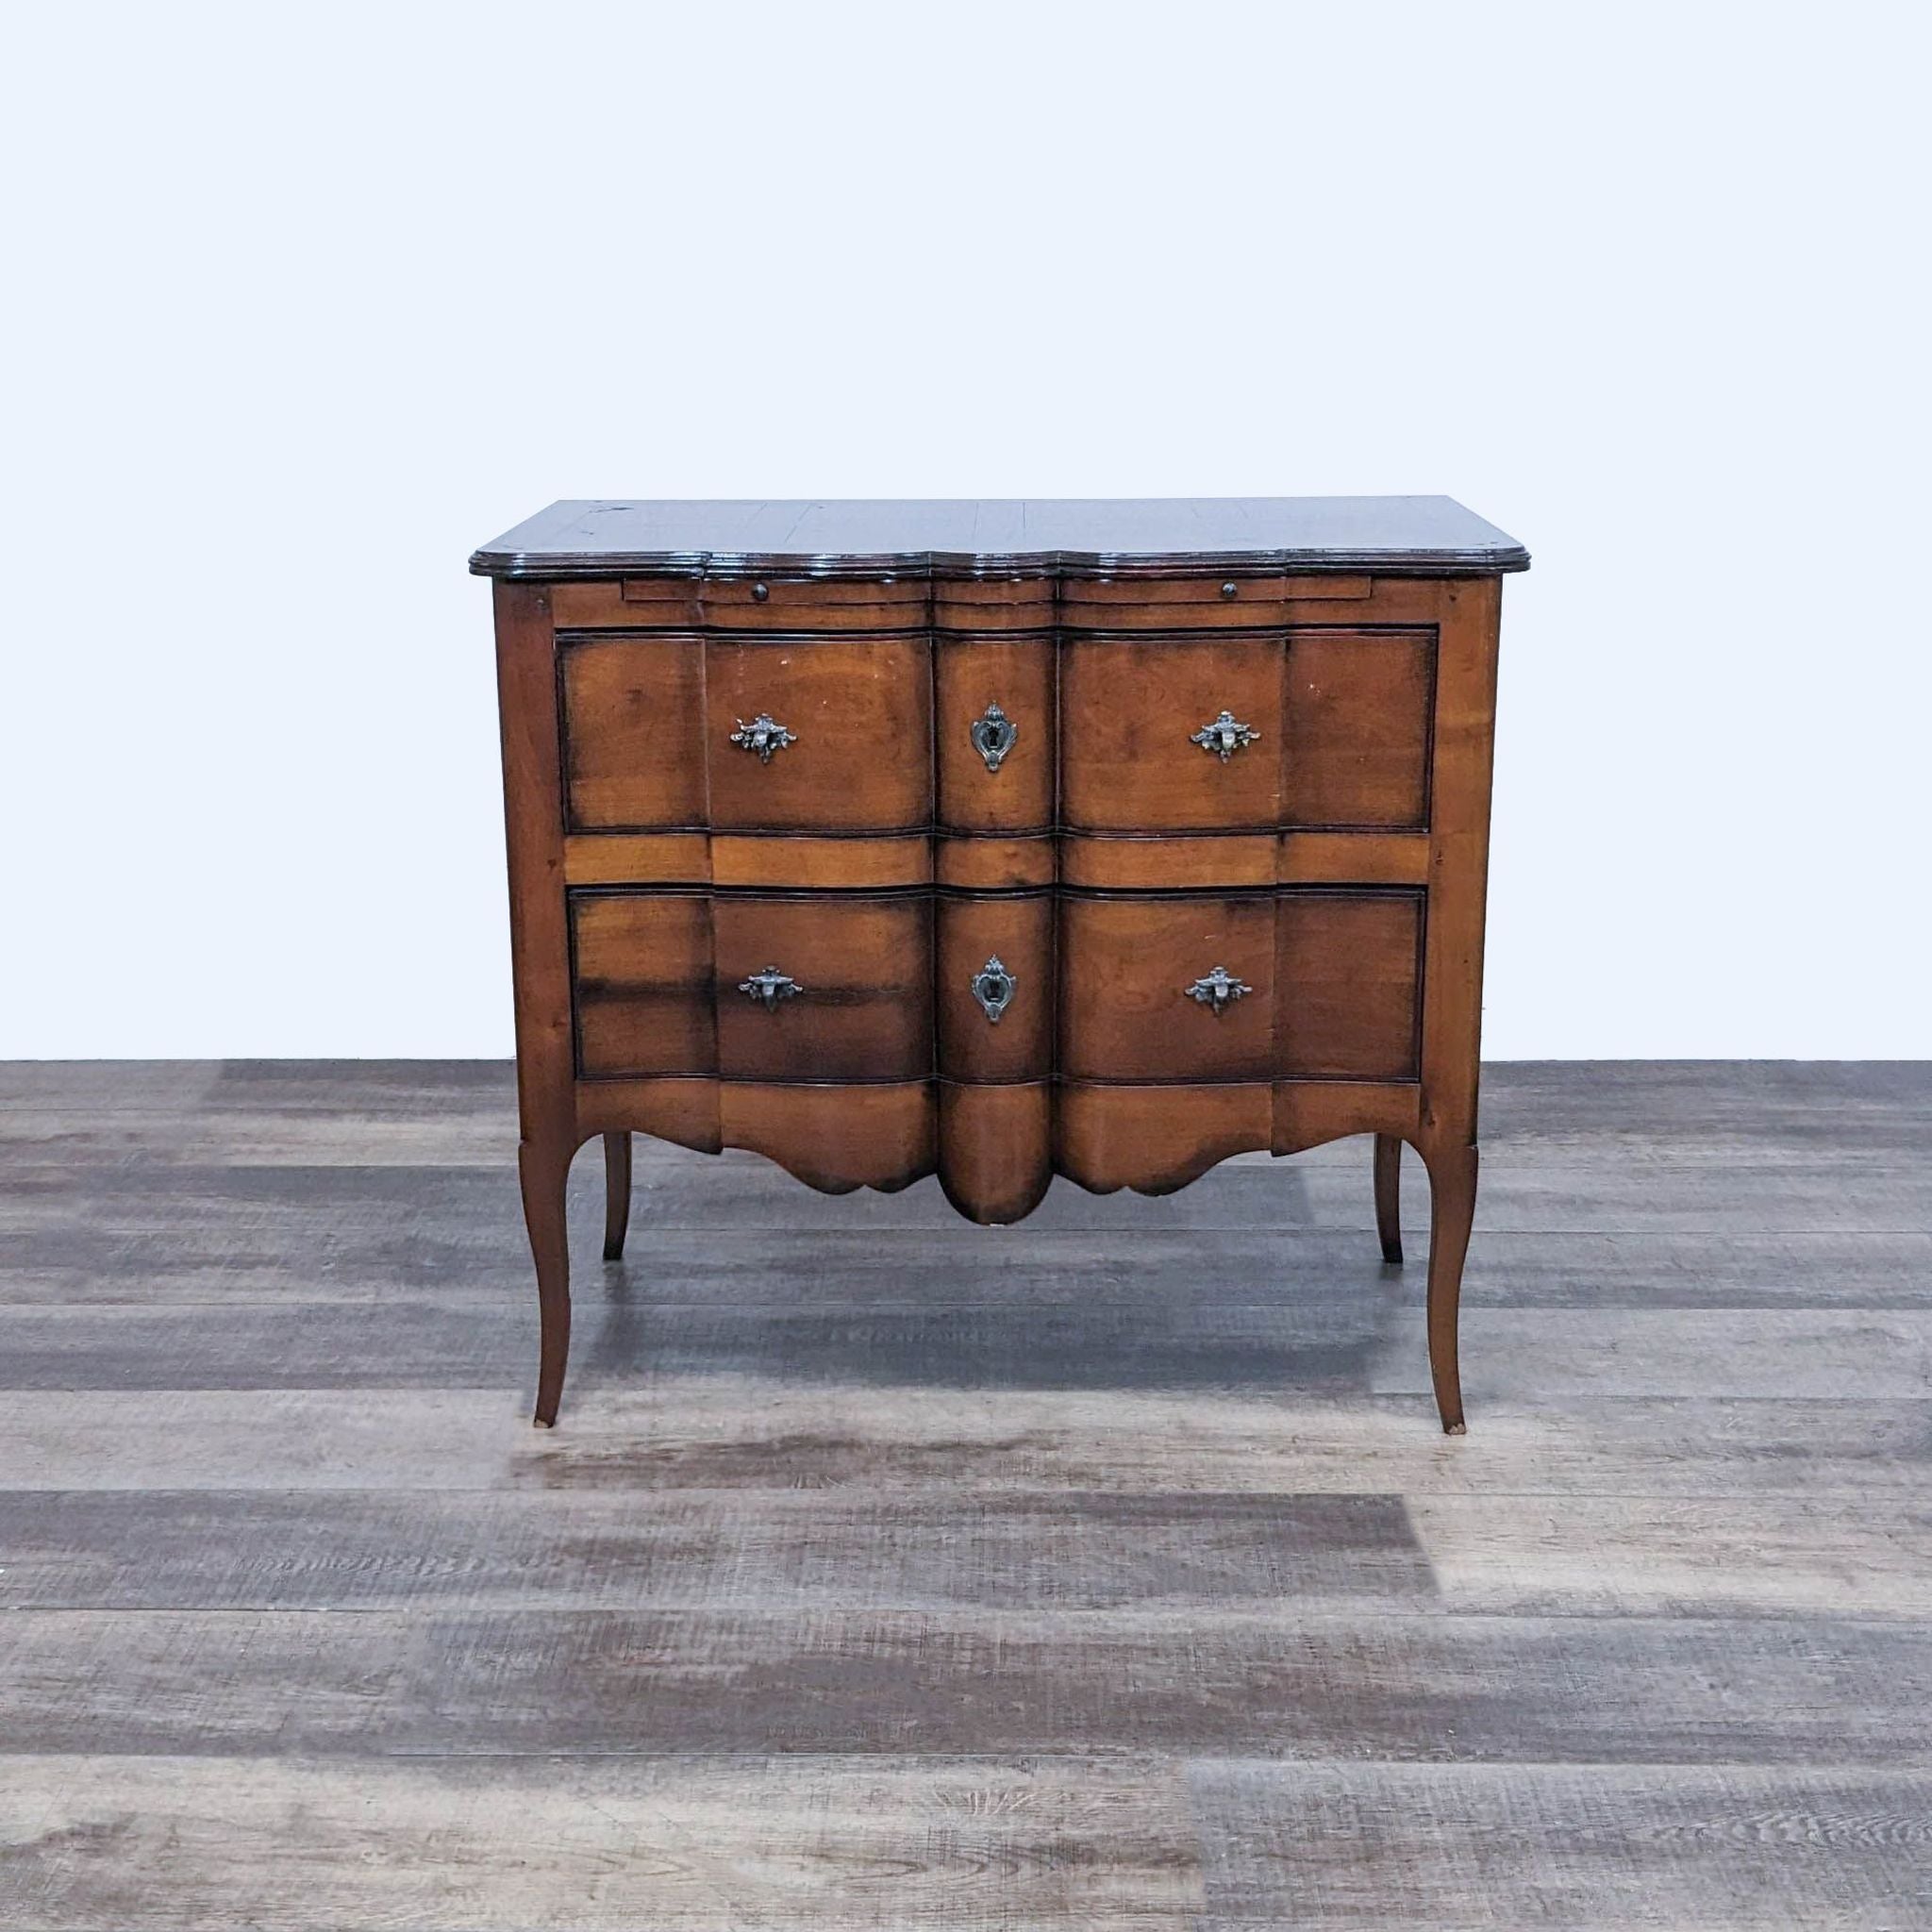 DeBournay two-drawer wooden dresser with curved lines, dovetail joinery, and ornate handles, standing on slender legs.